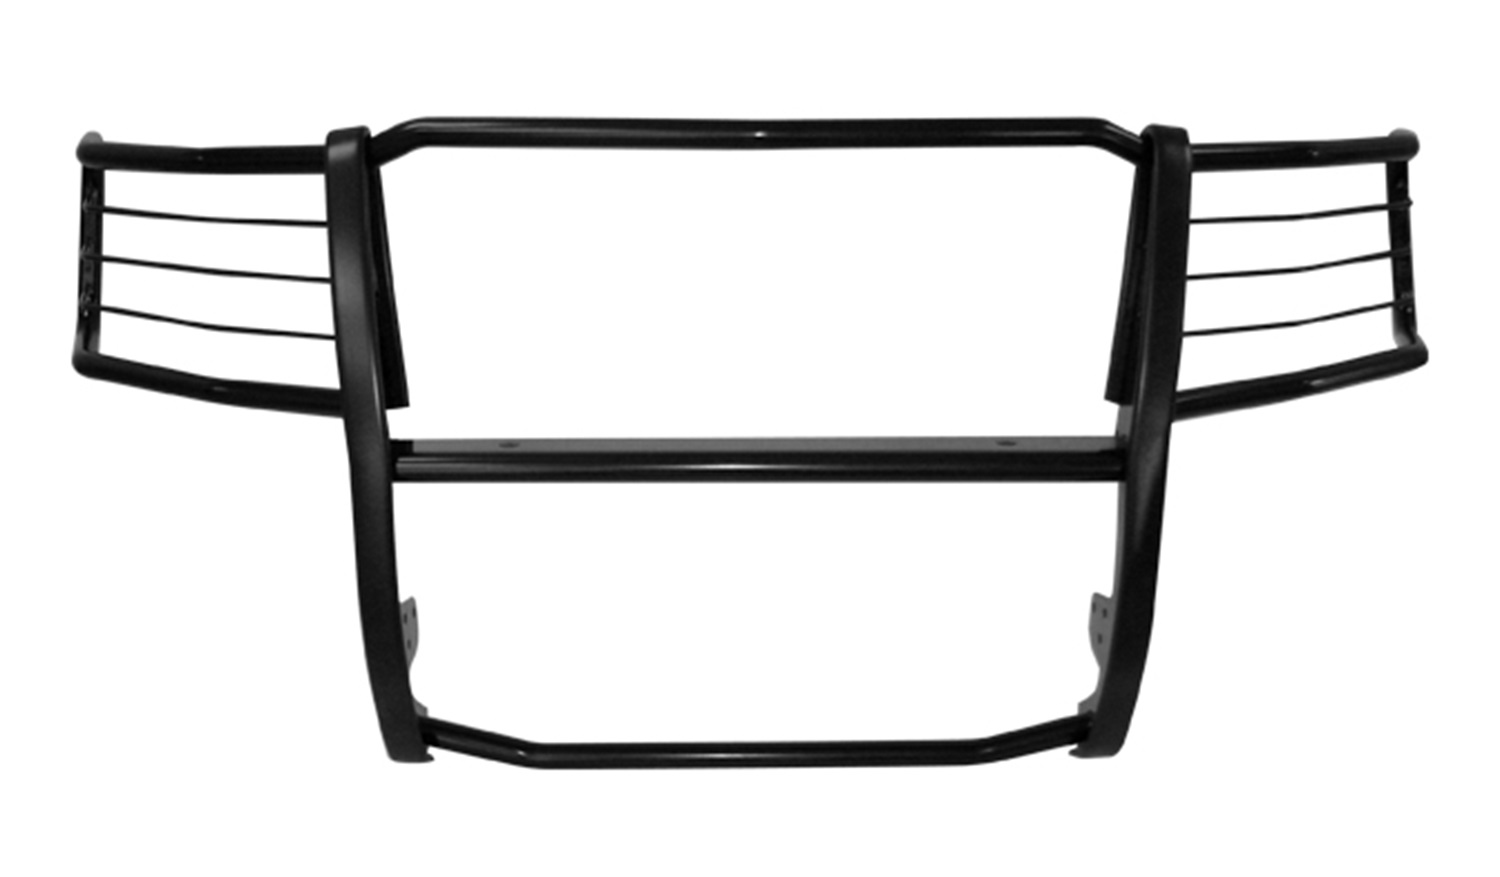 Aries Offroad Aries Offroad 4068 The Aries Bar; Grille/Brush Guard Fits 07-13 Silverado 1500